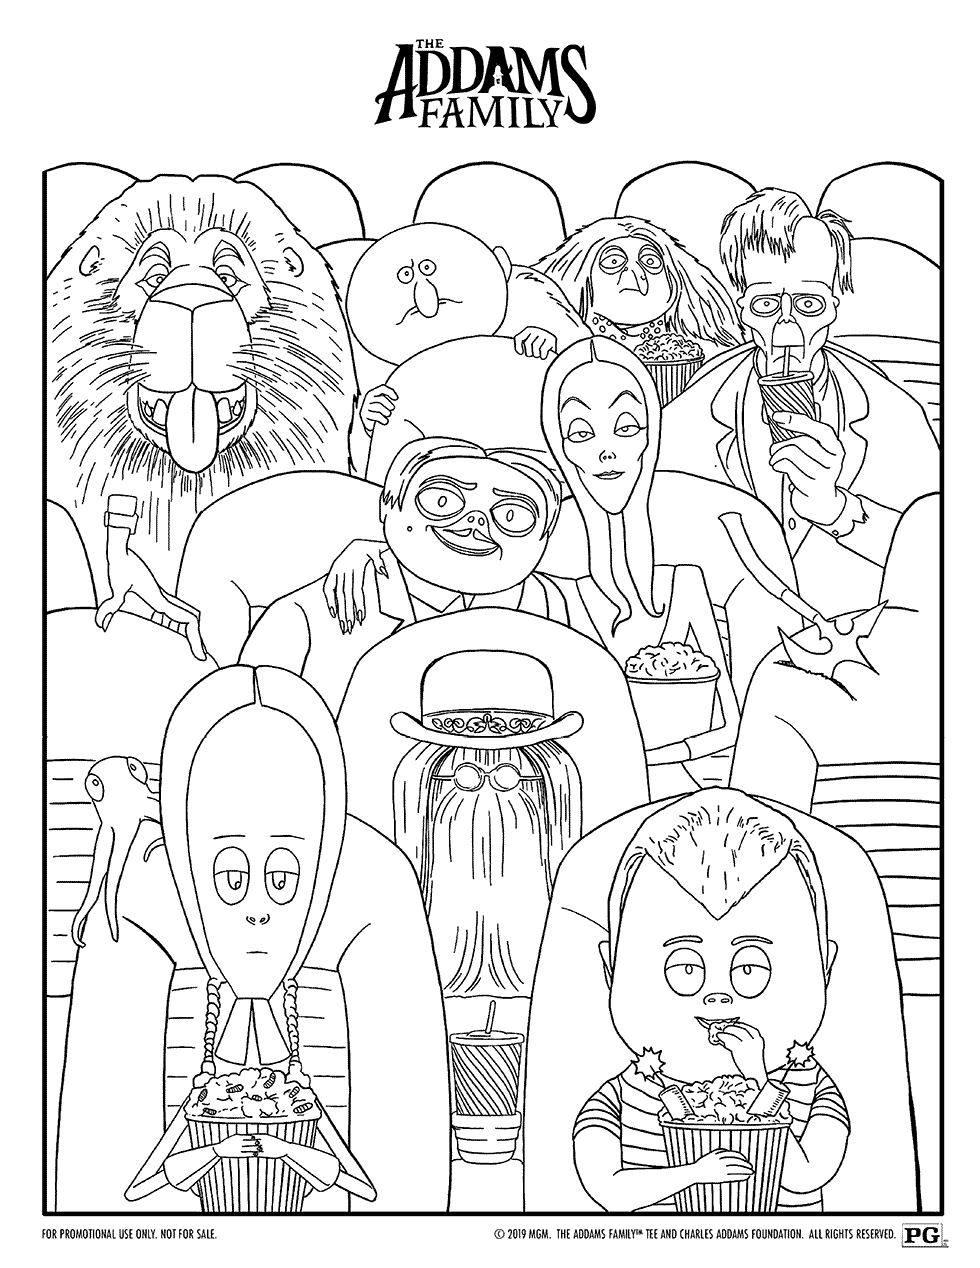 The Addams Family Coloring Pages Printable for Free Download